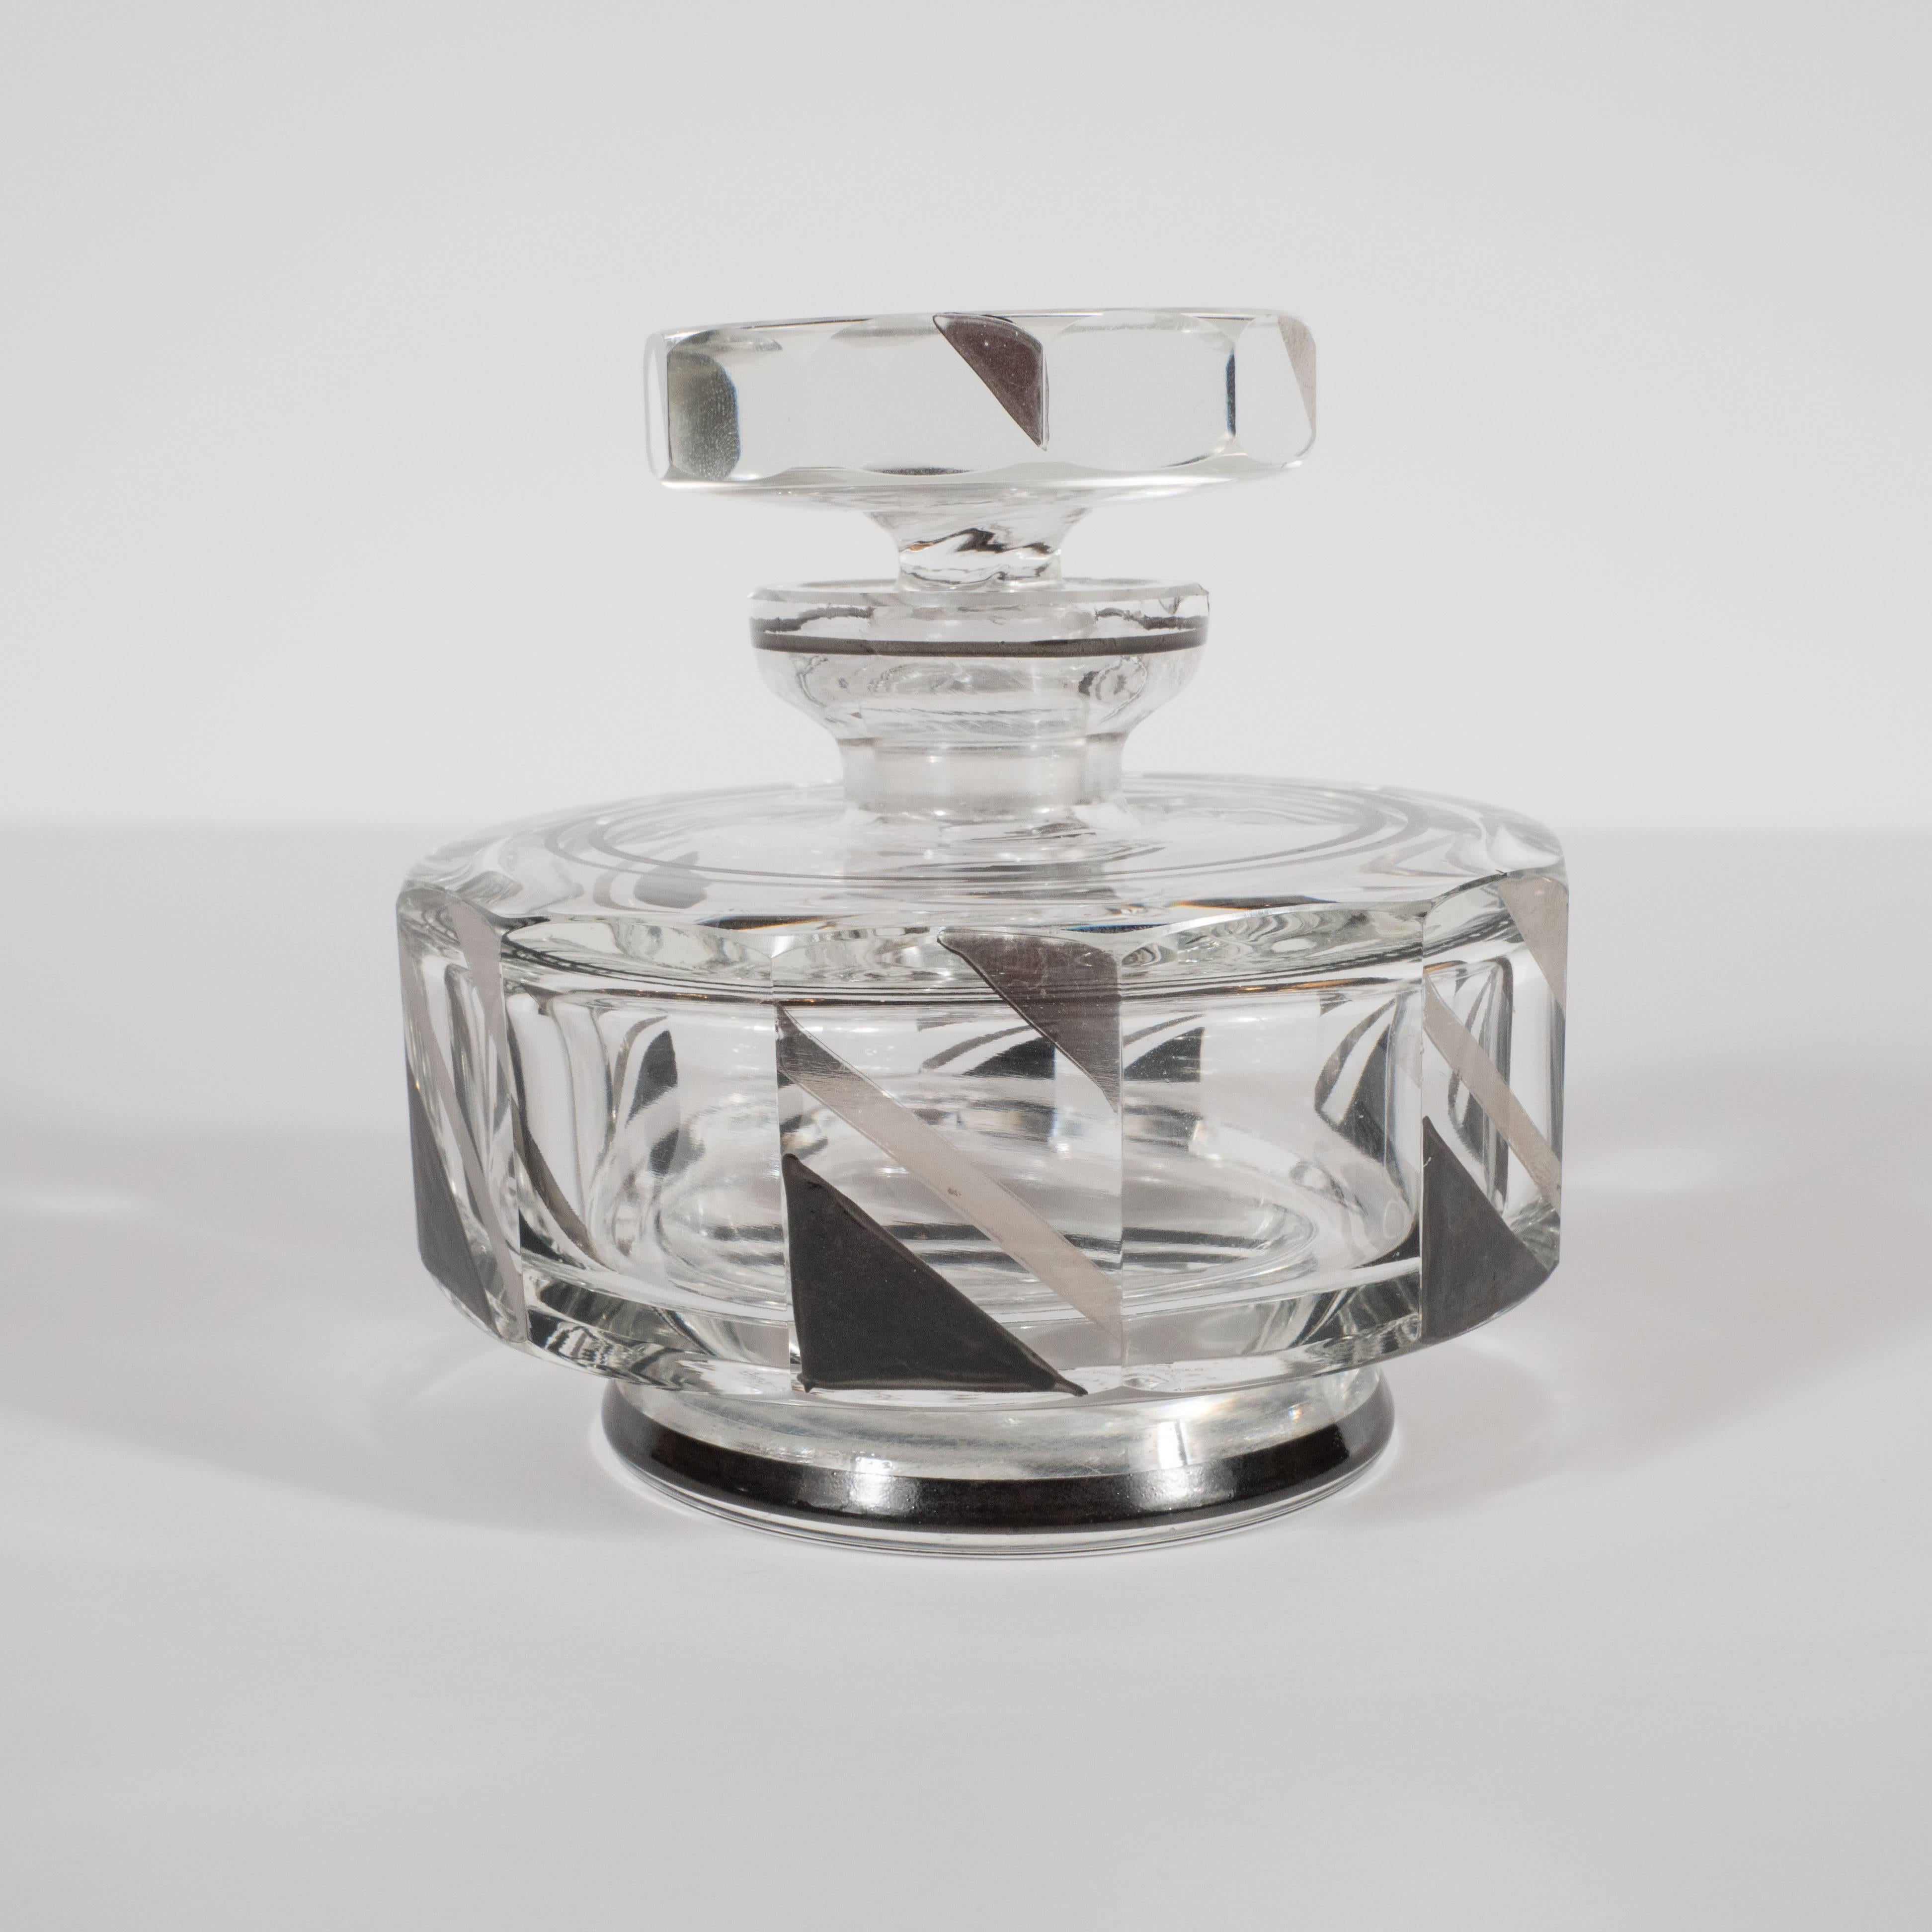 This refined Czech perfume bottles is composed of a beveled circular form (ten faceted sides in all) as well as a stopper of the same shape. A geometric pattern adorns alternating panels of the bottle- consisting of a black enamel in the lower right